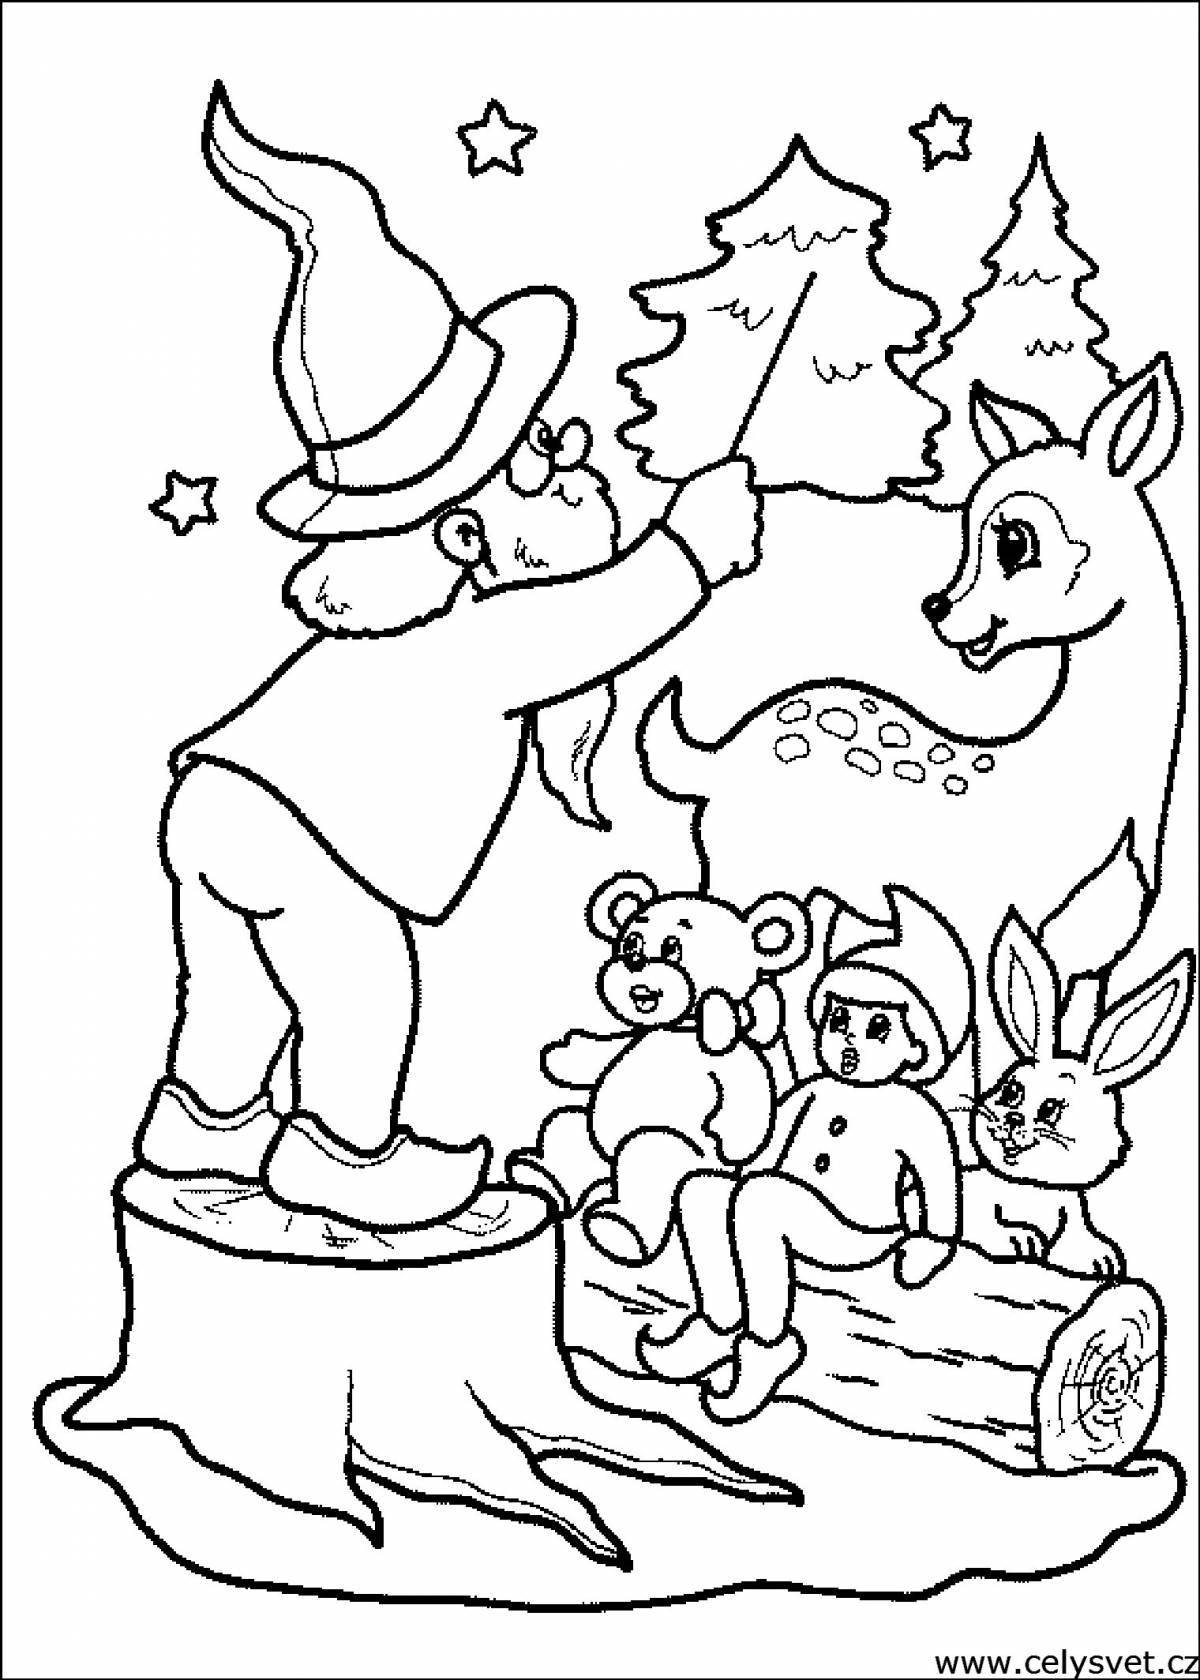 Fabulous Christmas coloring book for 5-6 year olds